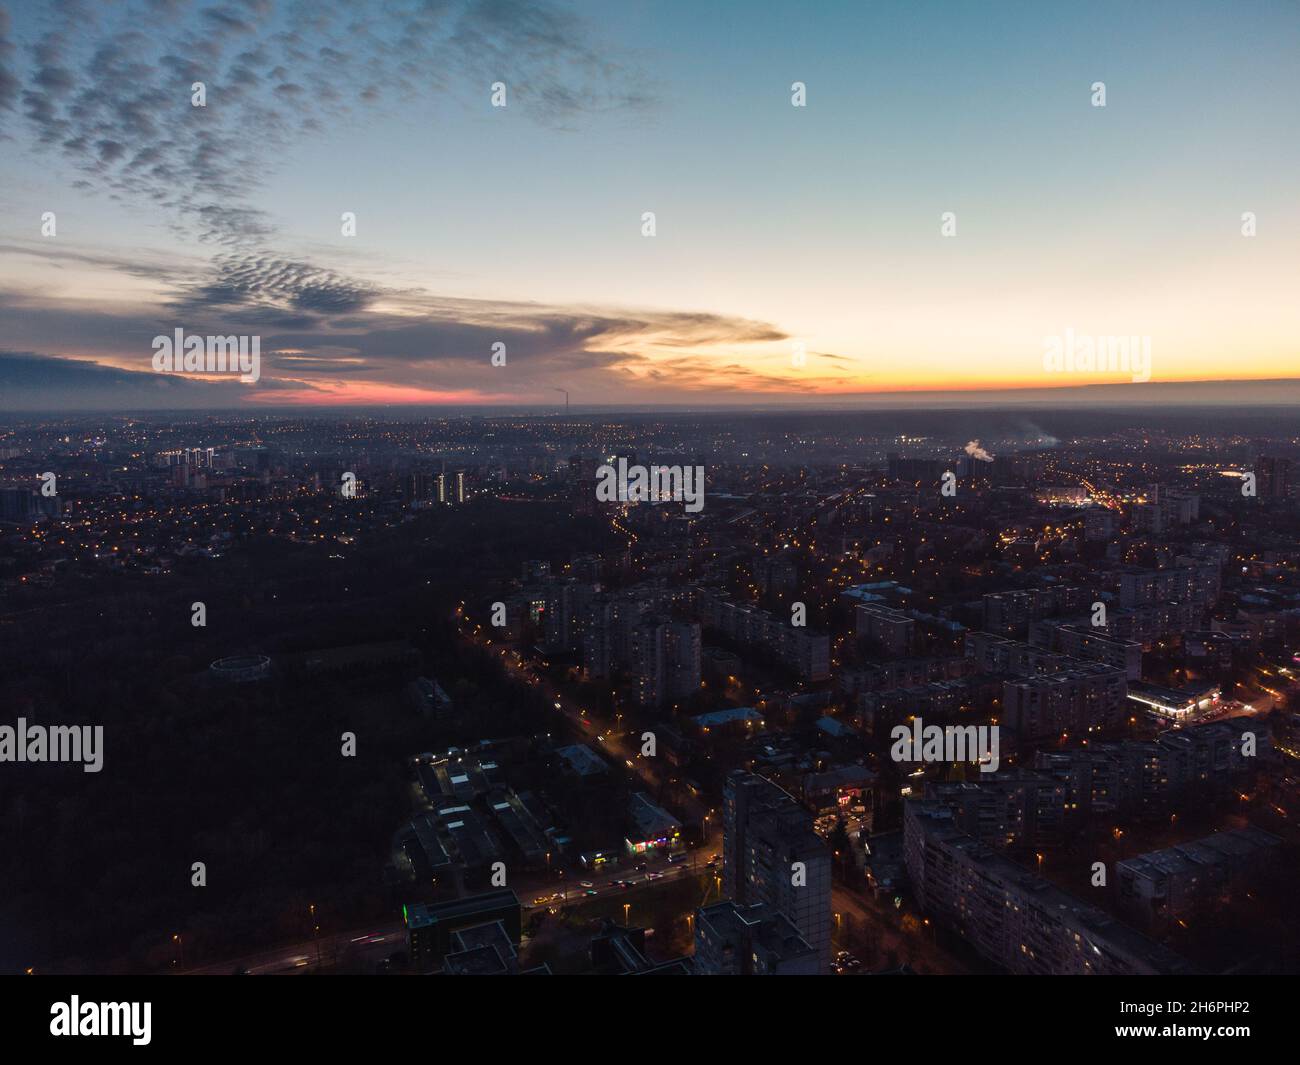 Aerial view Kharkiv city center, Pavlove pole with night lights on streets of residential district, scenic sunset view with epic skyscape Stock Photo